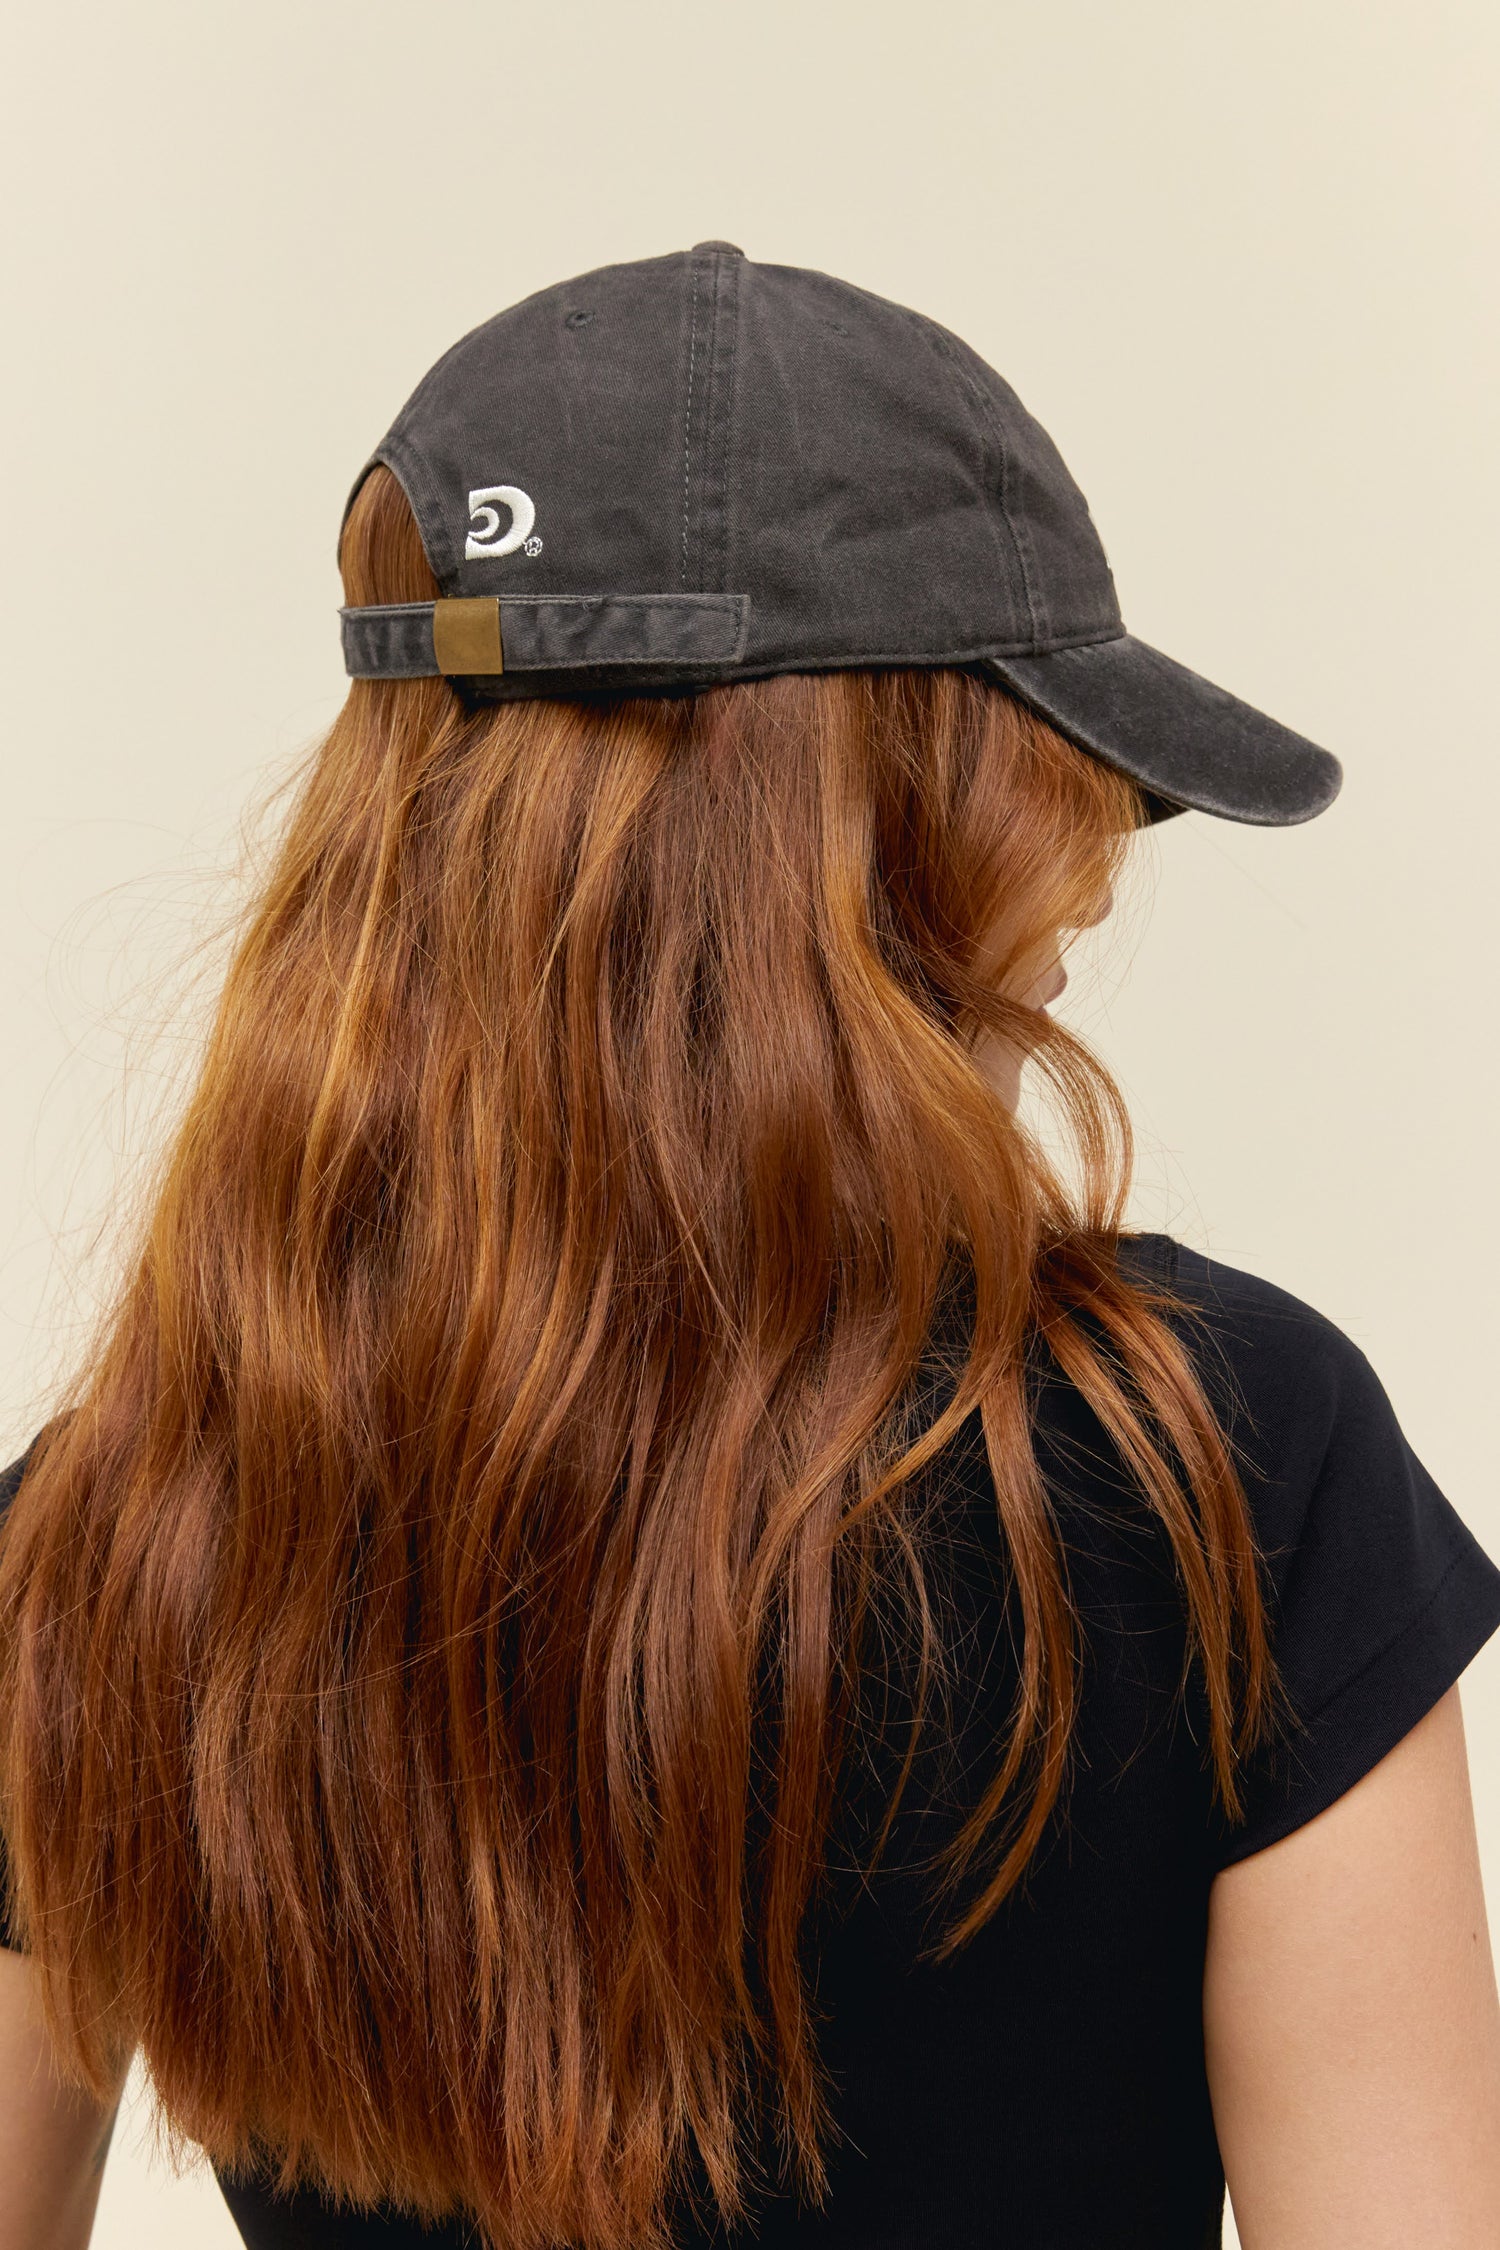 Model wearing a washed black dad hat with Daydreamer logo embroidery on the front and back.